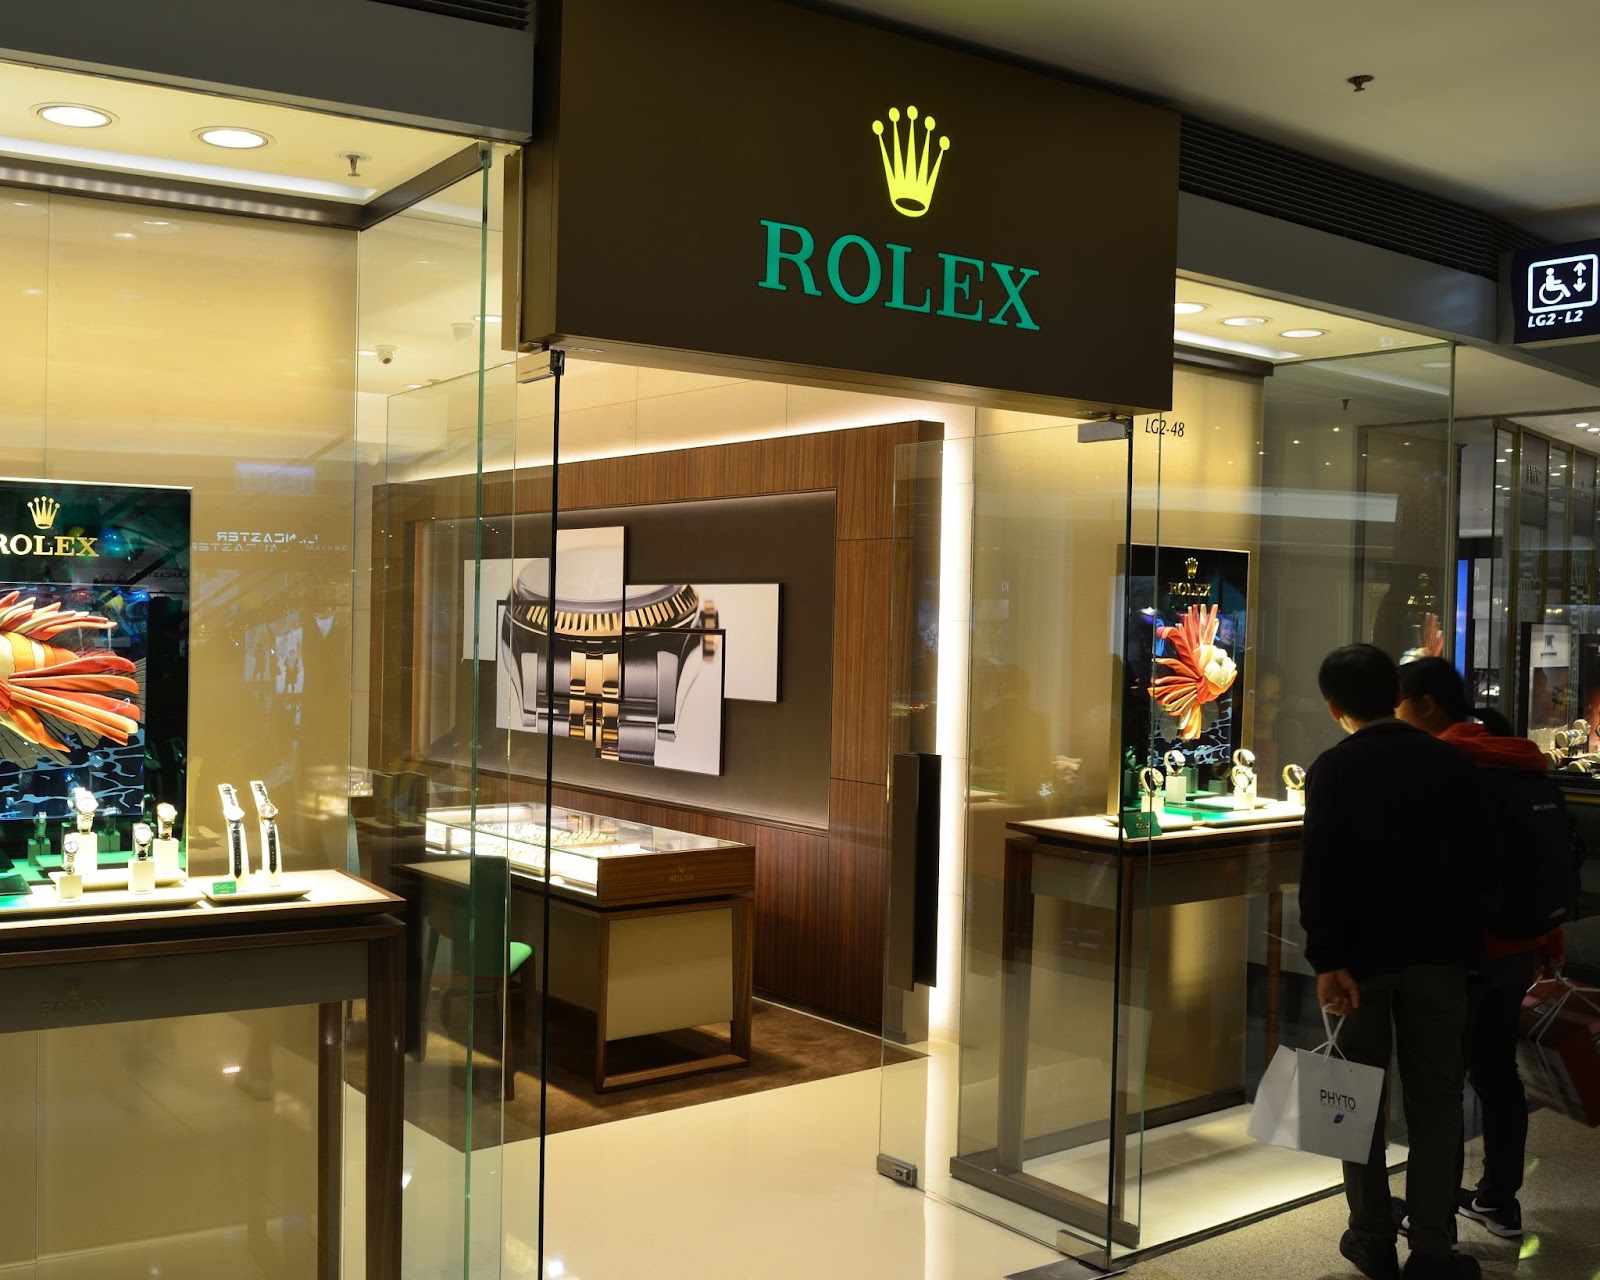 <u>Query</u>:  Two people showing an interest to purchase a watch<br>
      <u>Named Entity</u>: Rolex